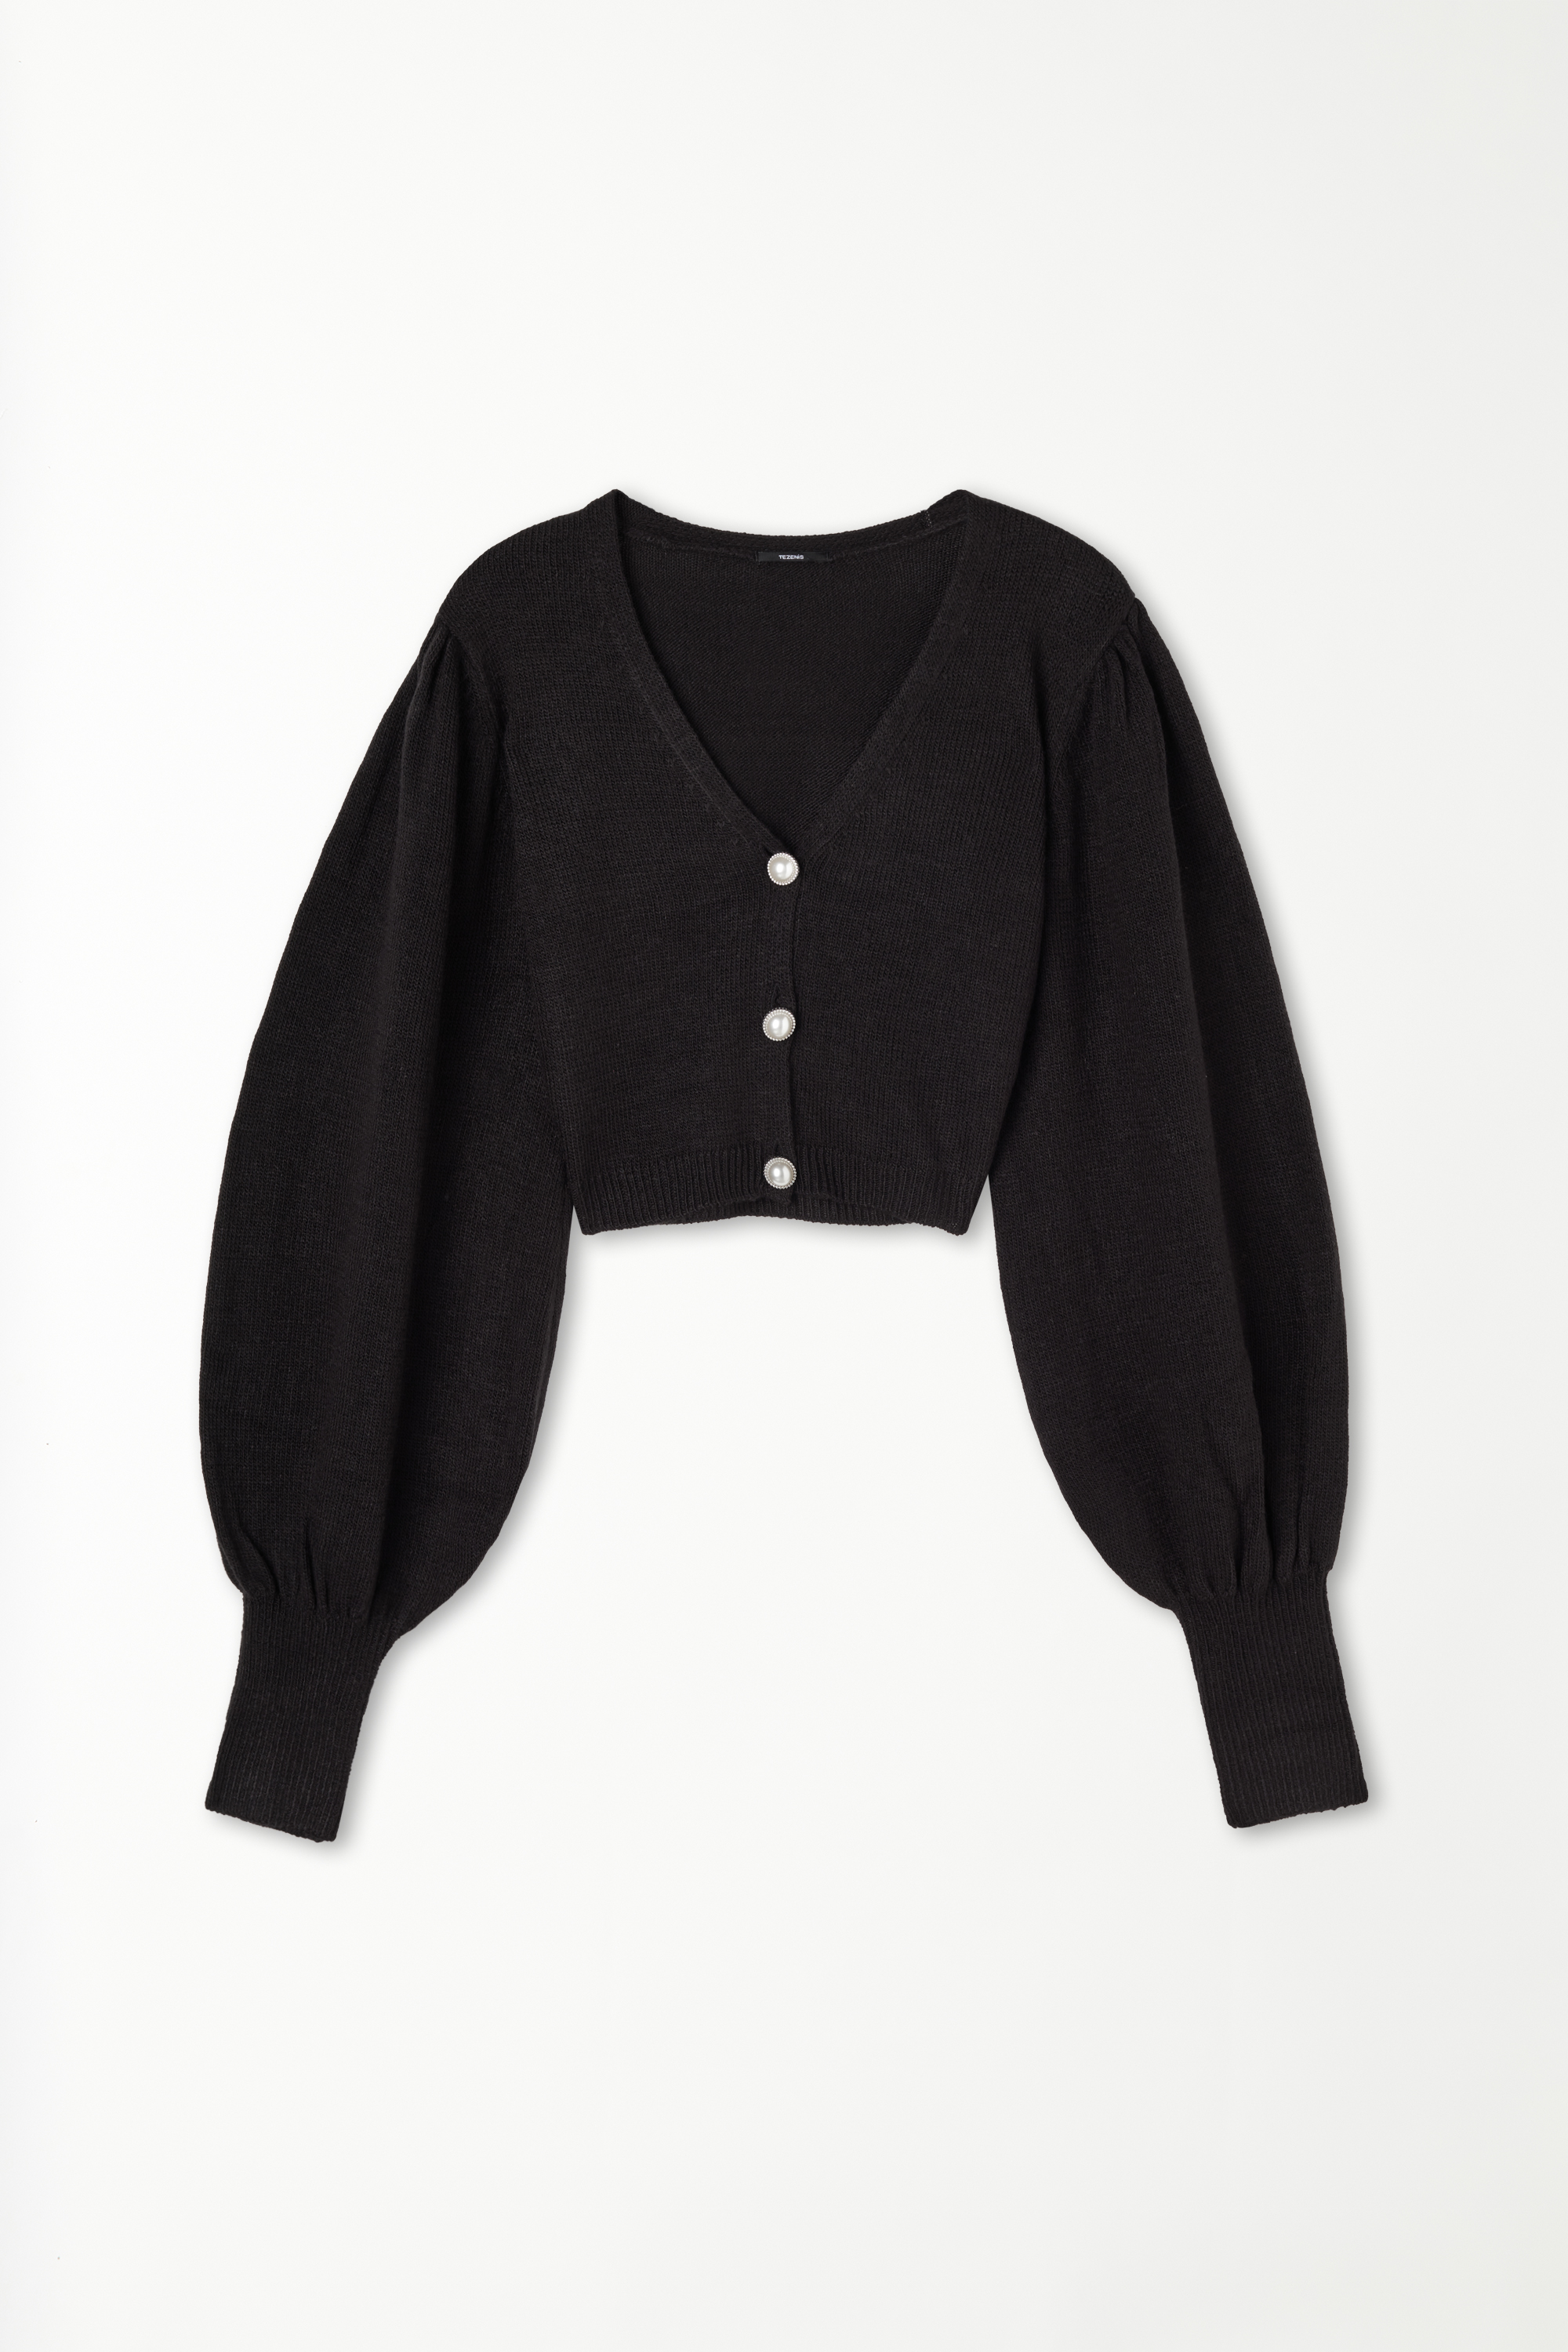 Long-Sleeved Fully-Fashioned Short Cardigan with Buttons